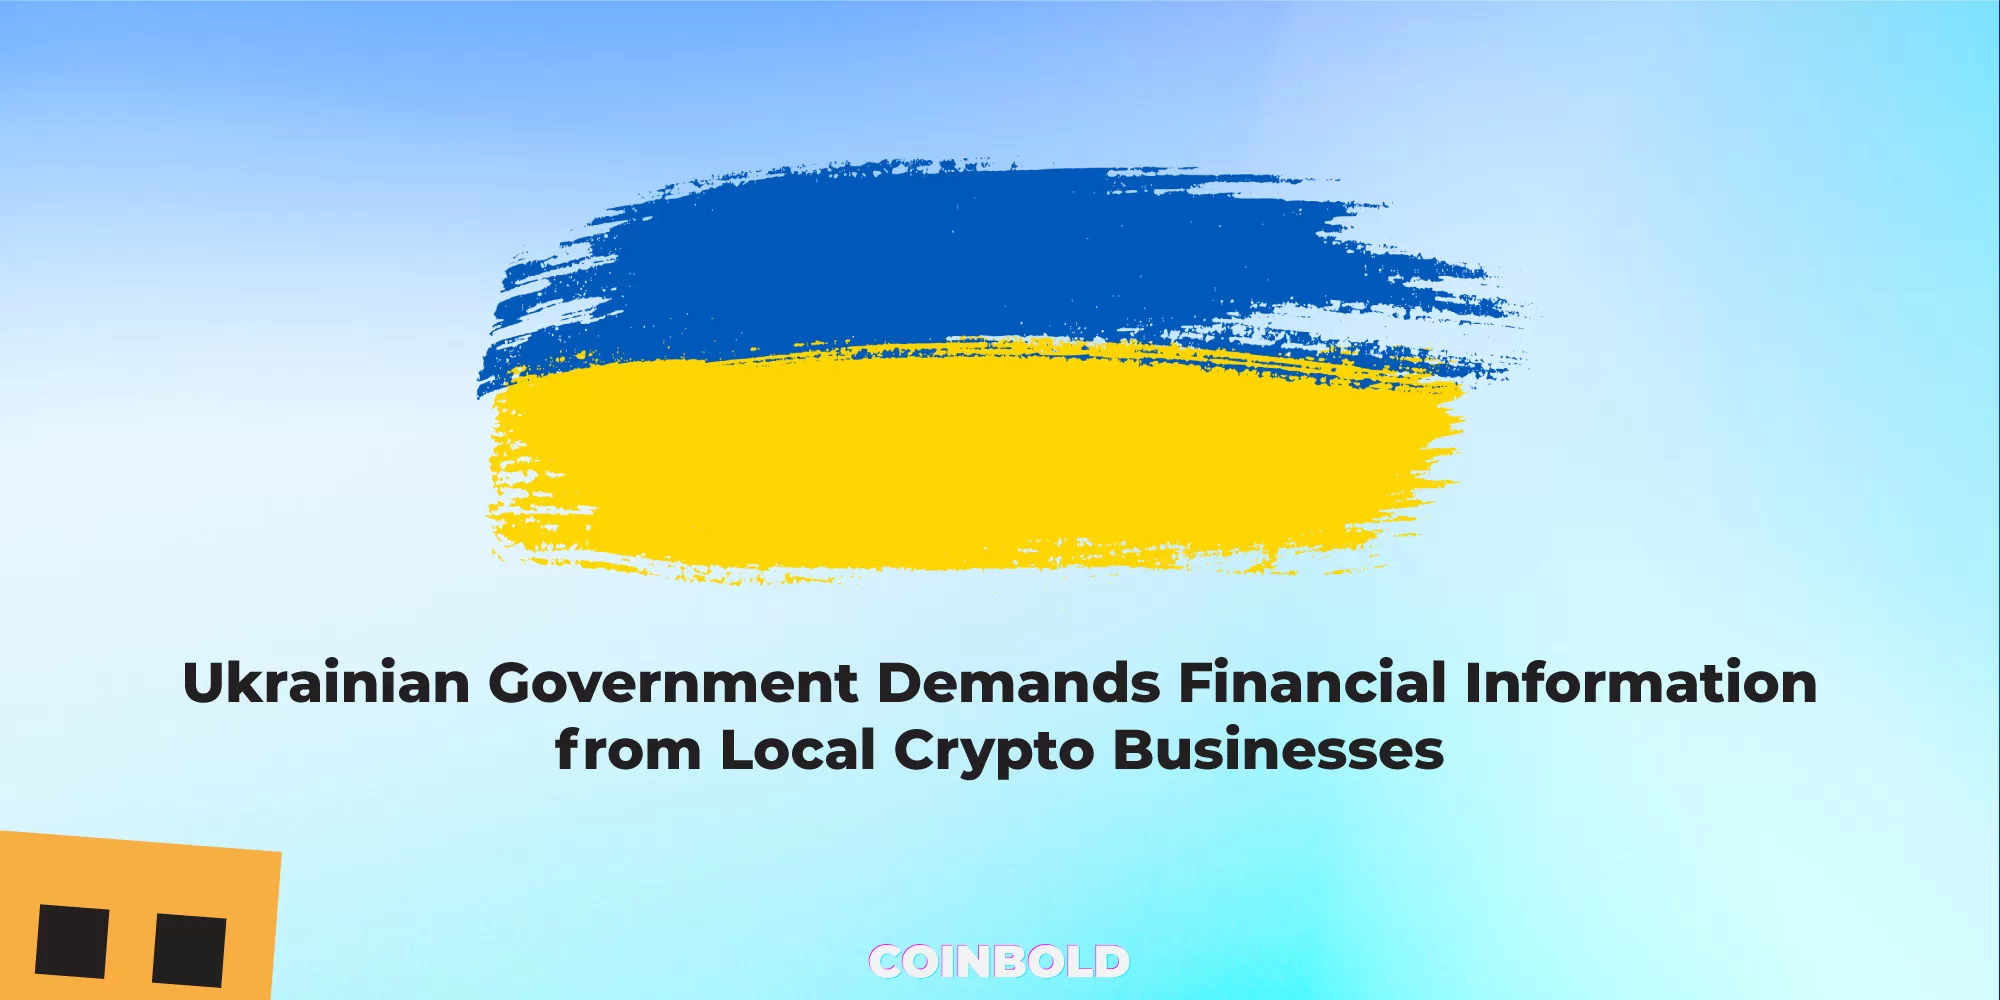 Ukrainian Government Demands Financial Information from Local Crypto Businesses